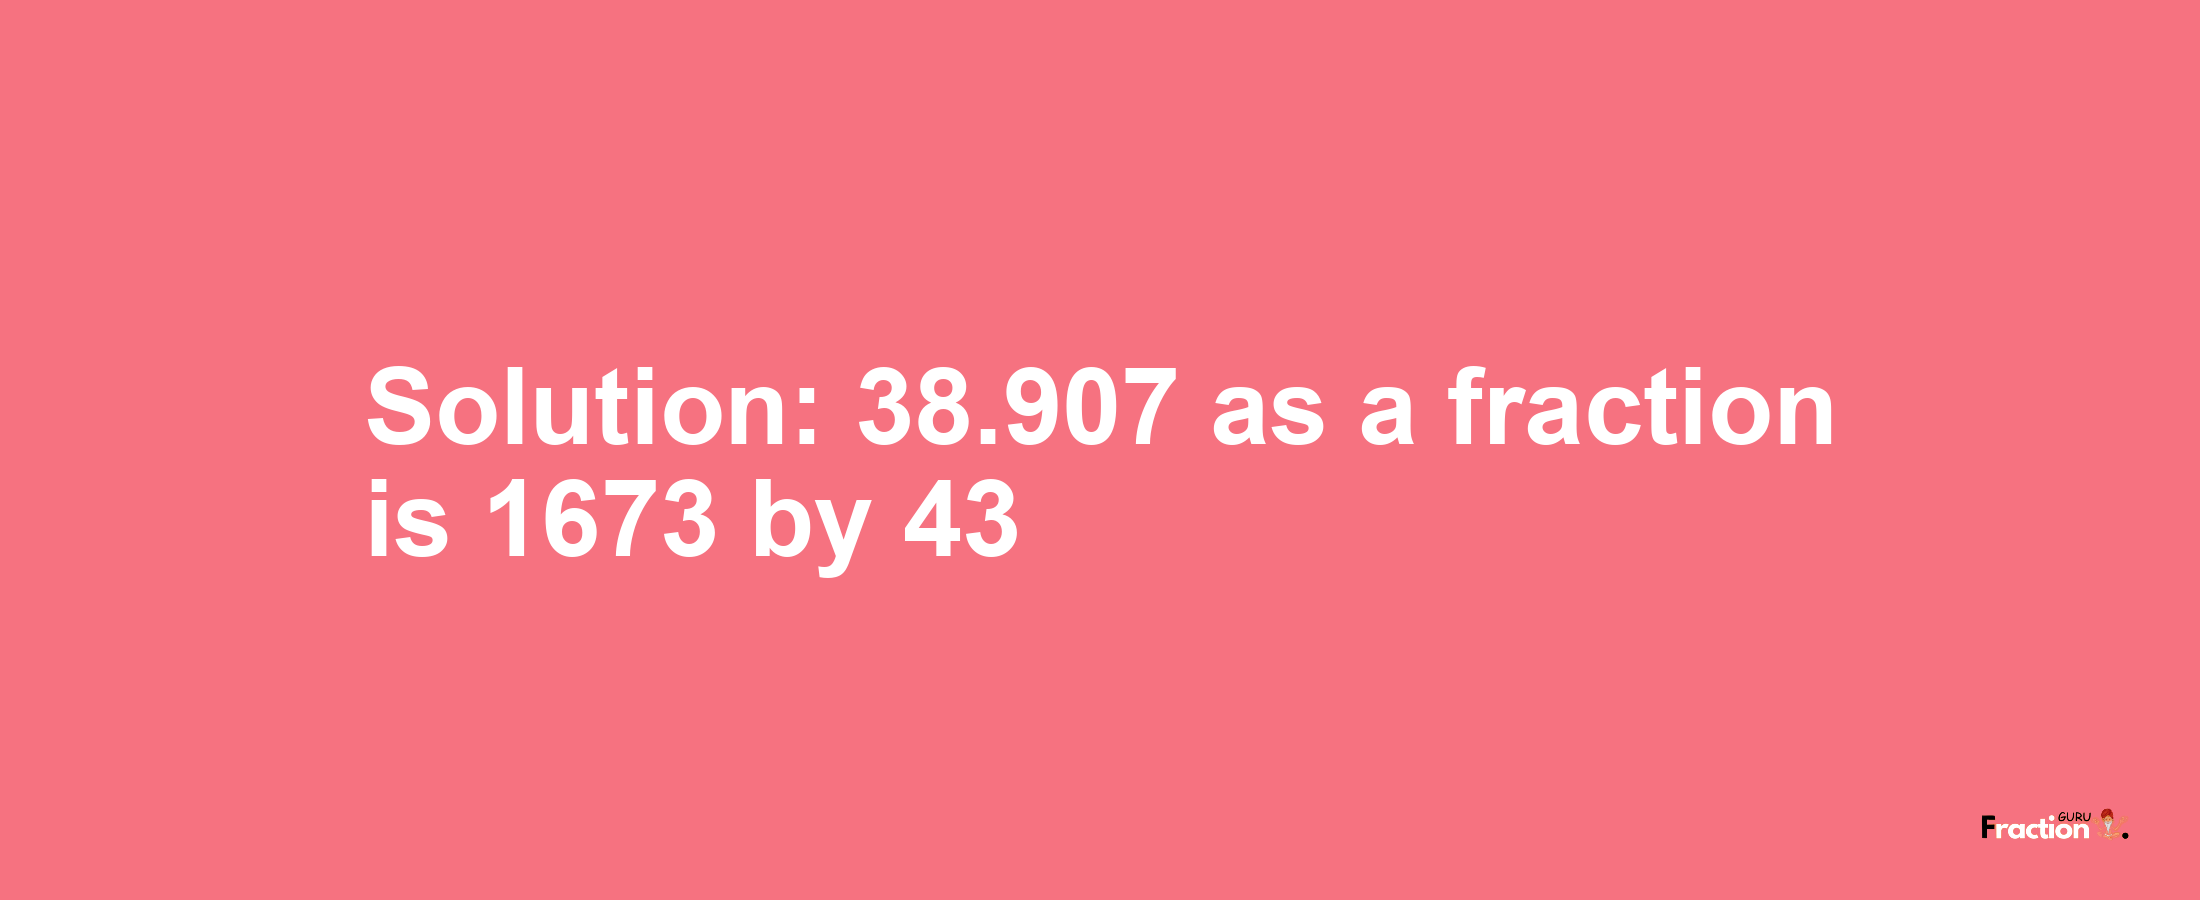 Solution:38.907 as a fraction is 1673/43